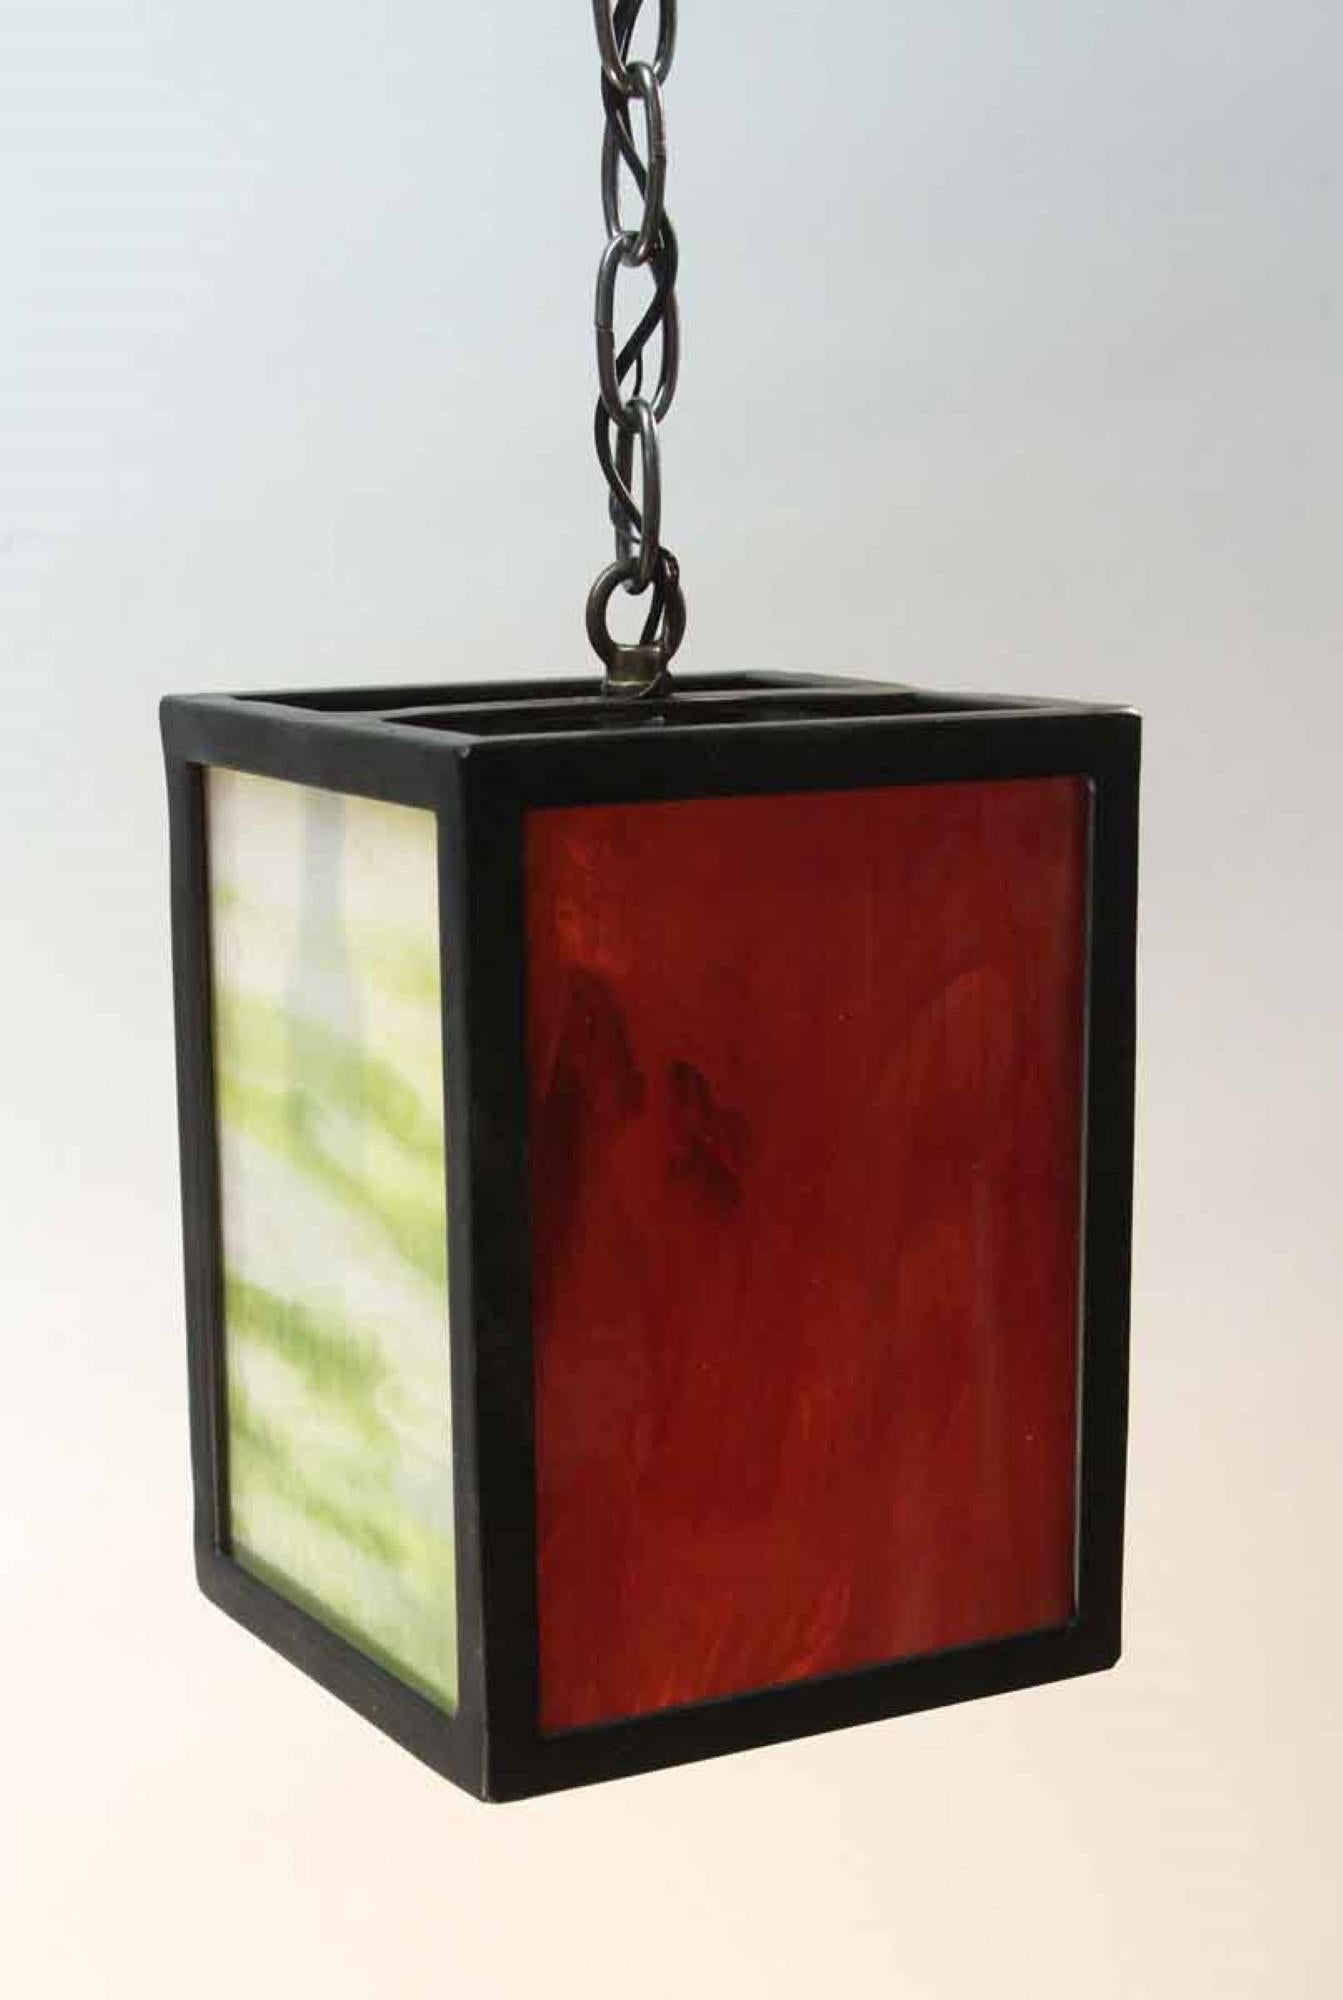 American 2010s Iron Lantern Pendant Light with Stained Glass Mid-Century Modern Style